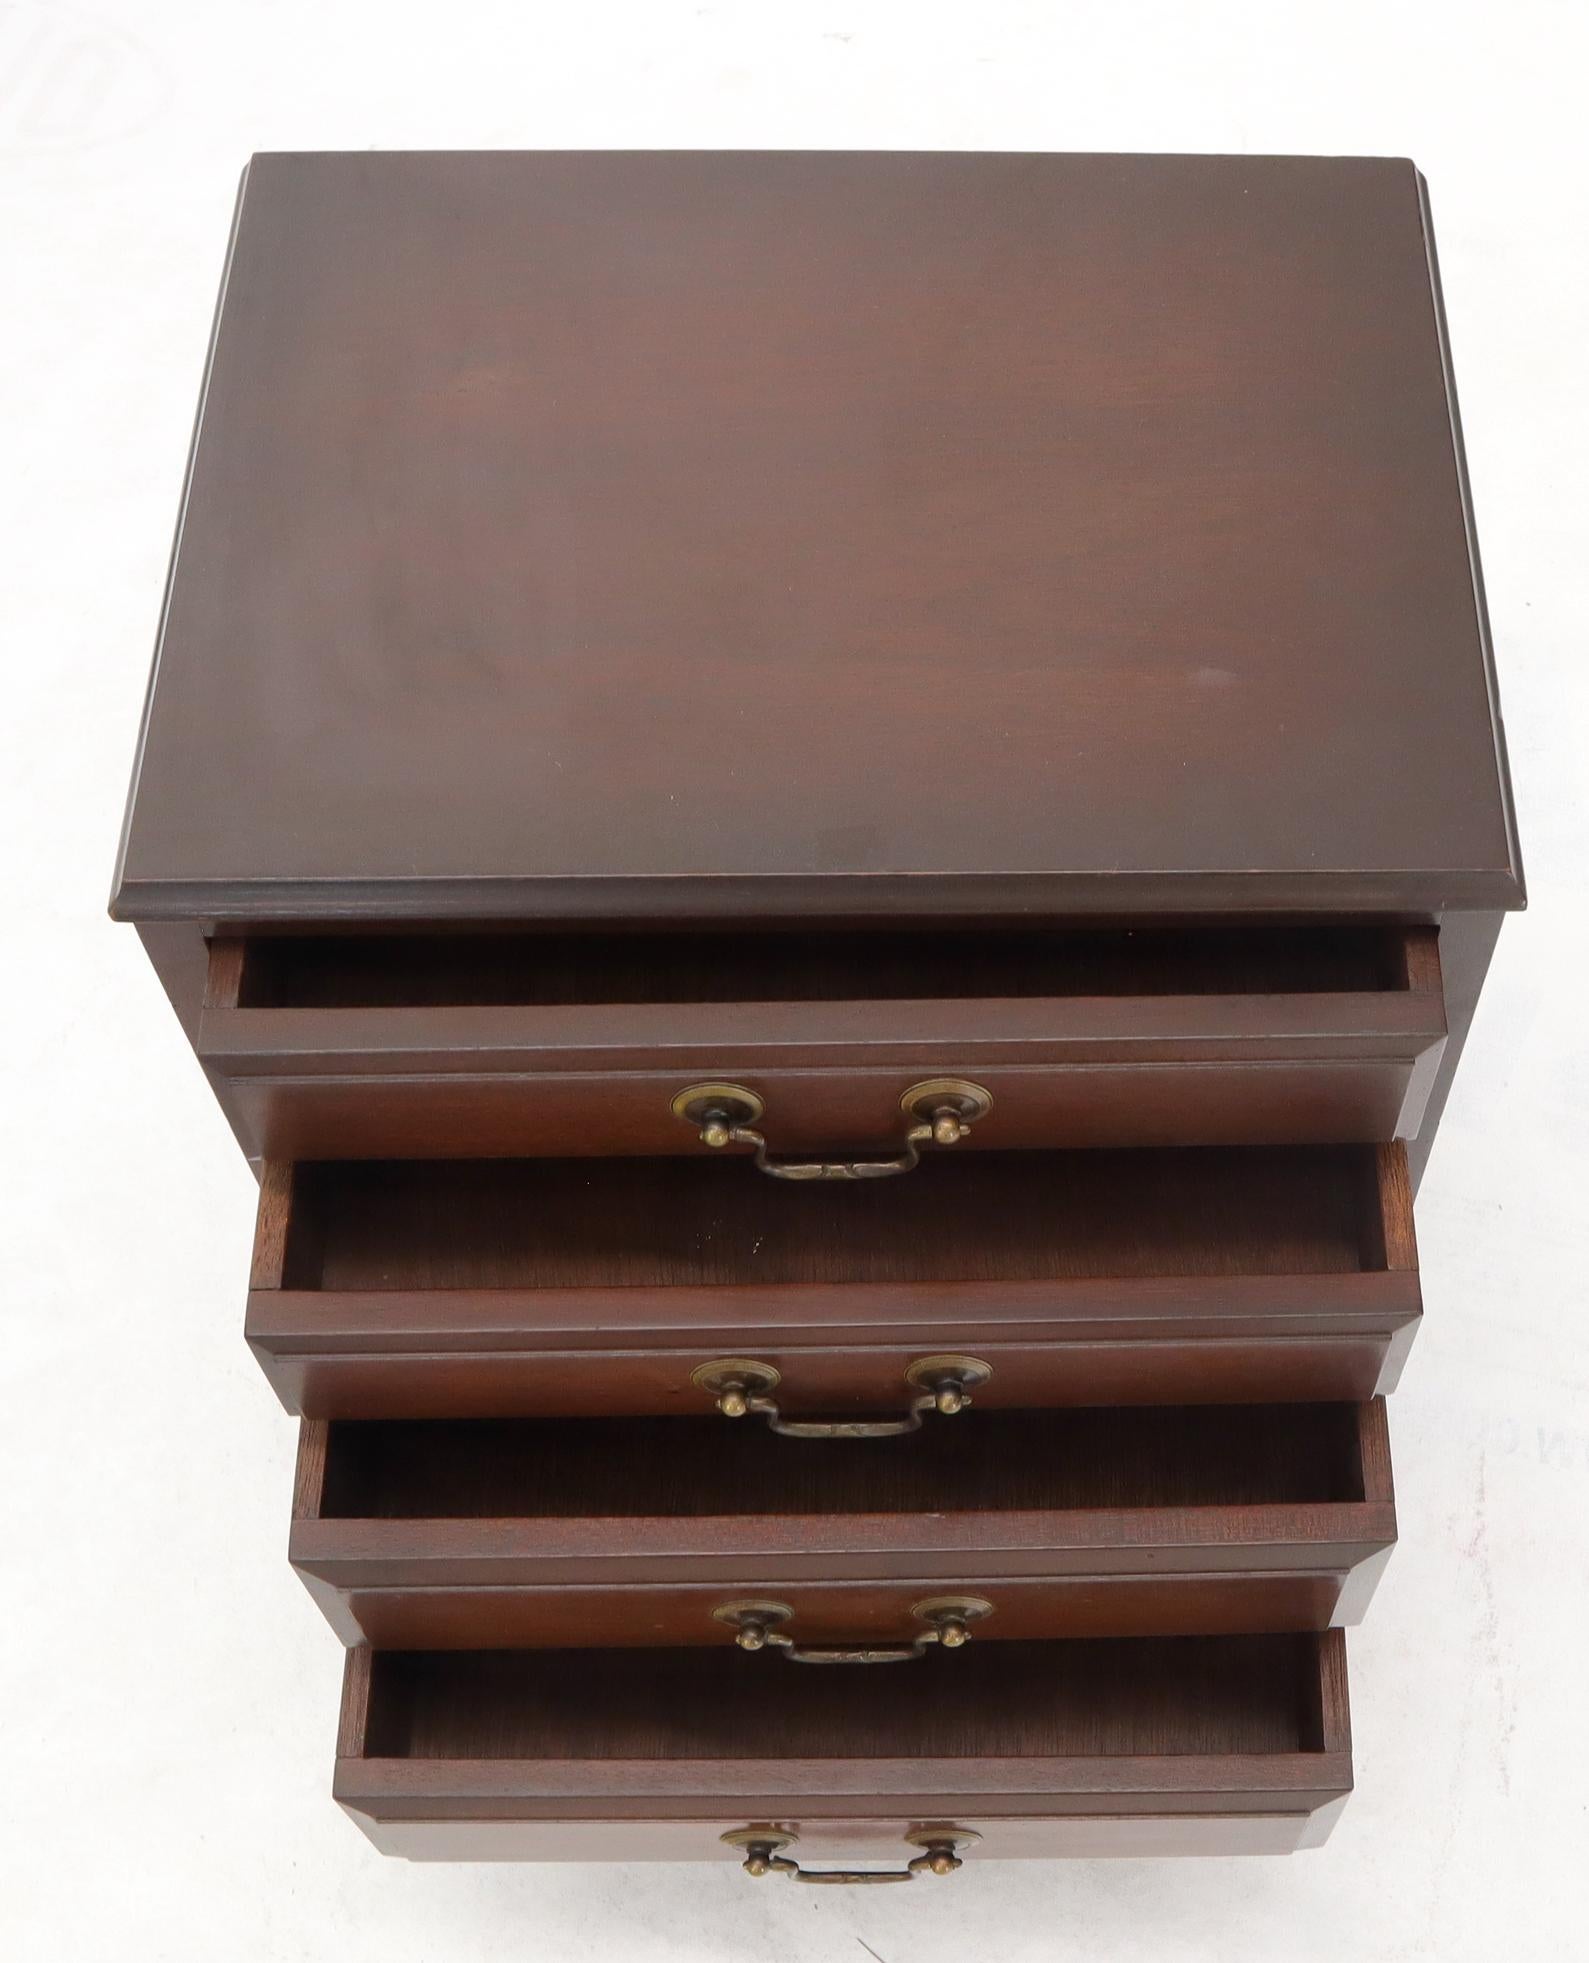 Federal Miniature 4 Drawers Jewelry Letter Campaign Chest Dresser with Brass Drop Pulls For Sale